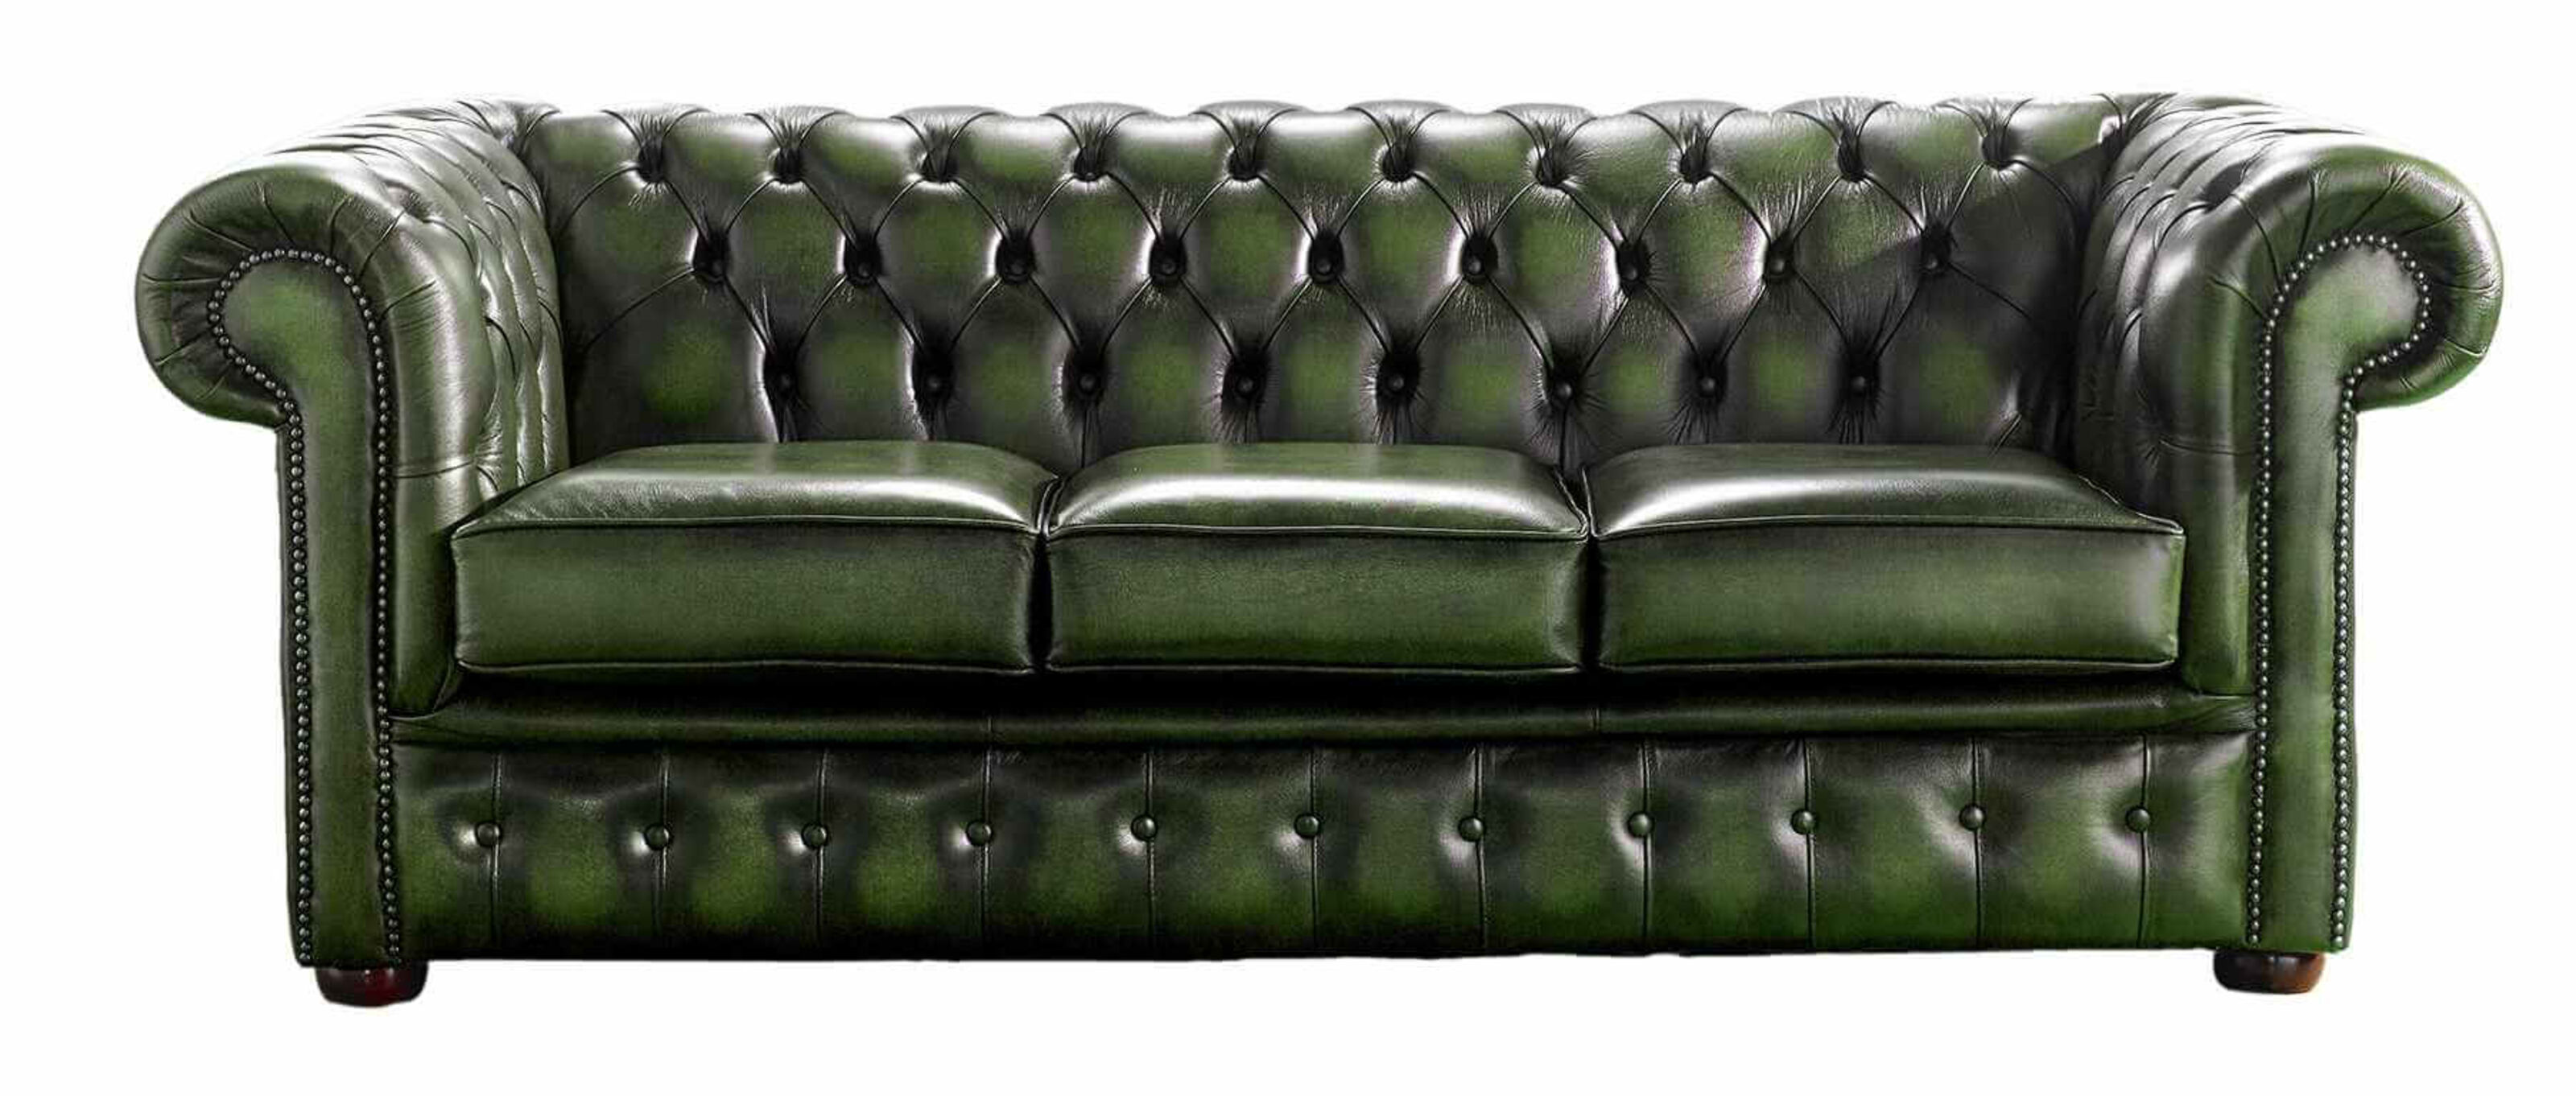 Classic Comfort Available Chesterfield Couches for Sale  %Post Title